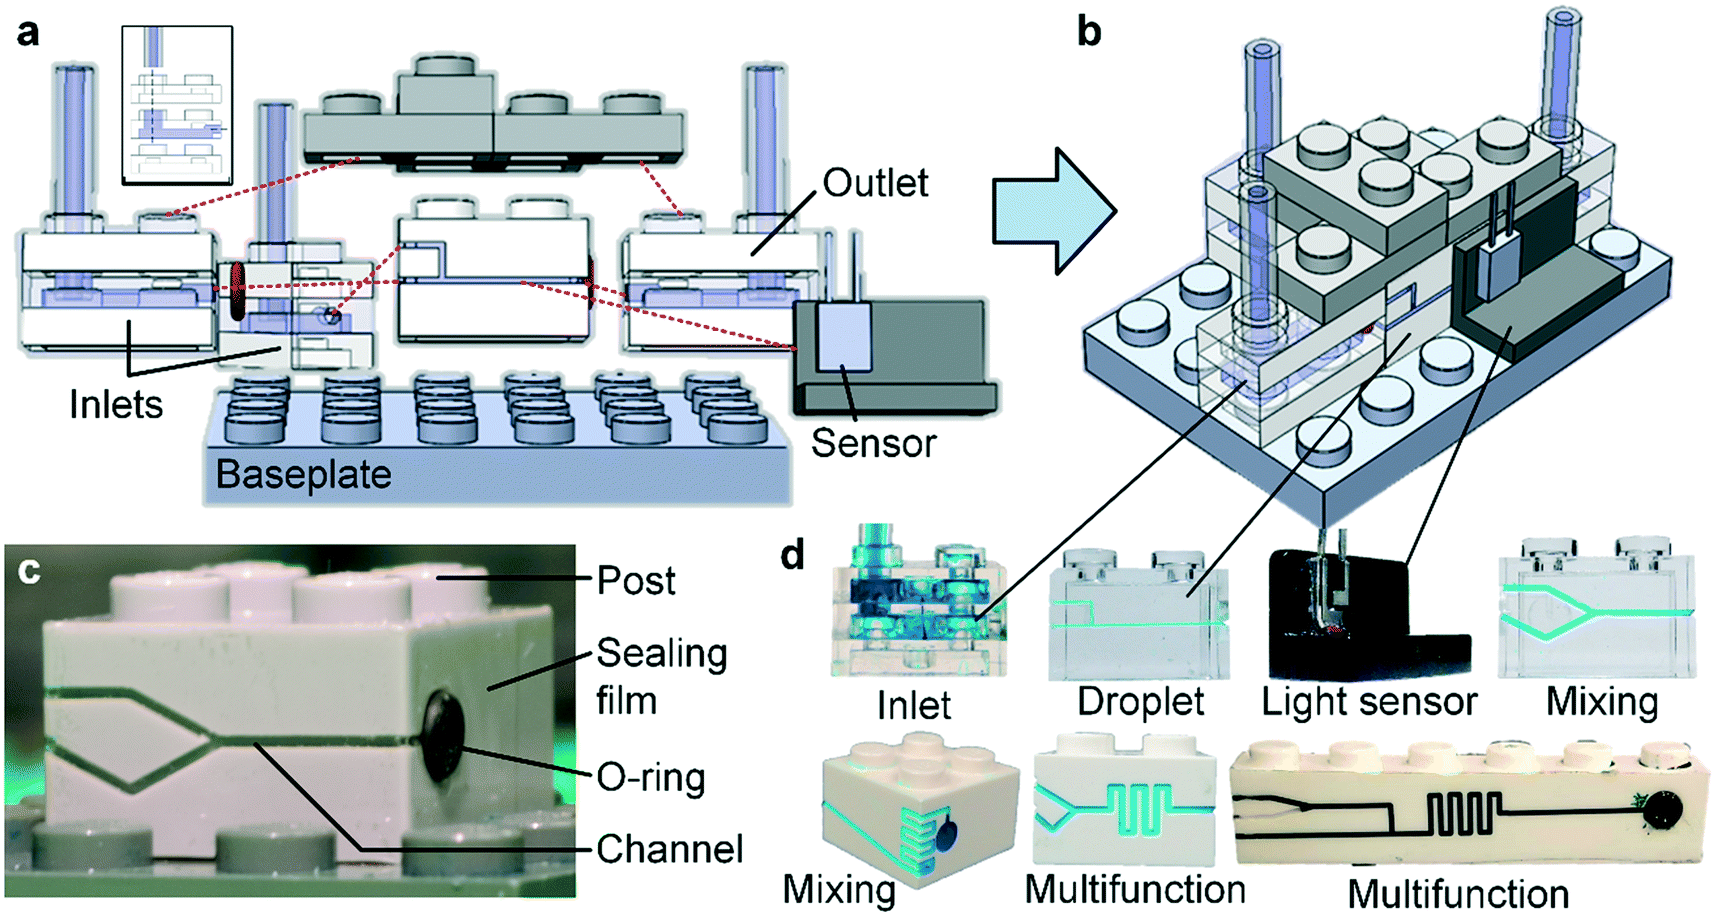 High-precision modular microfluidics by micromilling of interlocking  injection-molded blocks - Lab on a Chip (RSC Publishing)  DOI:10.1039/C7LC00951H